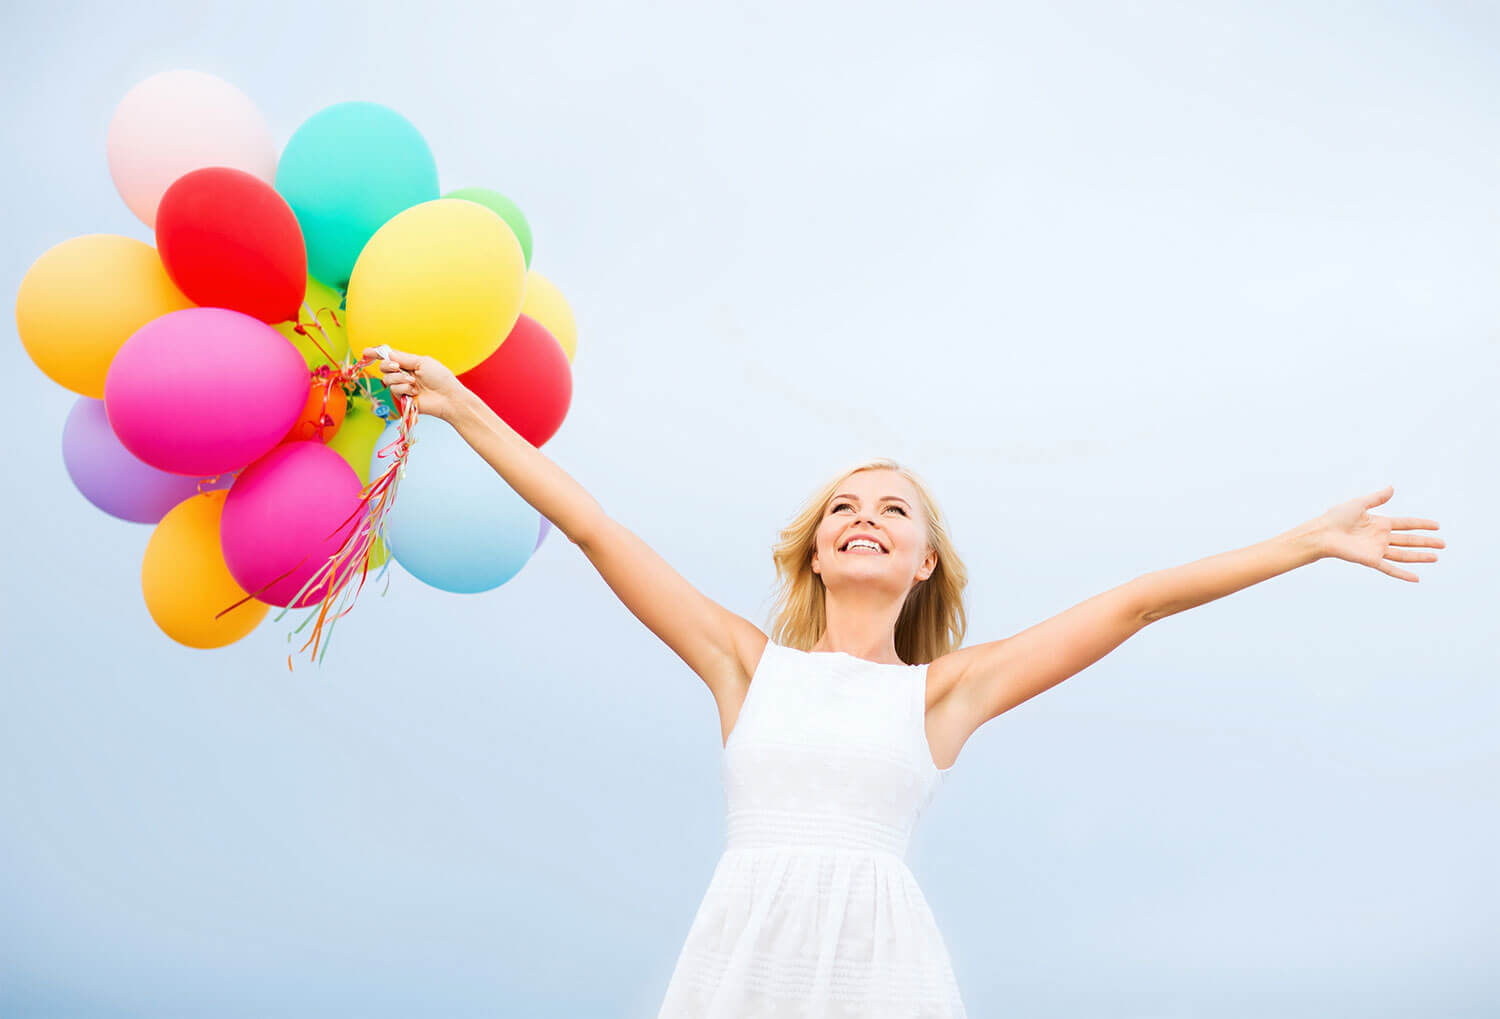 Women holding balloons in her hand while she looks happily into the sky